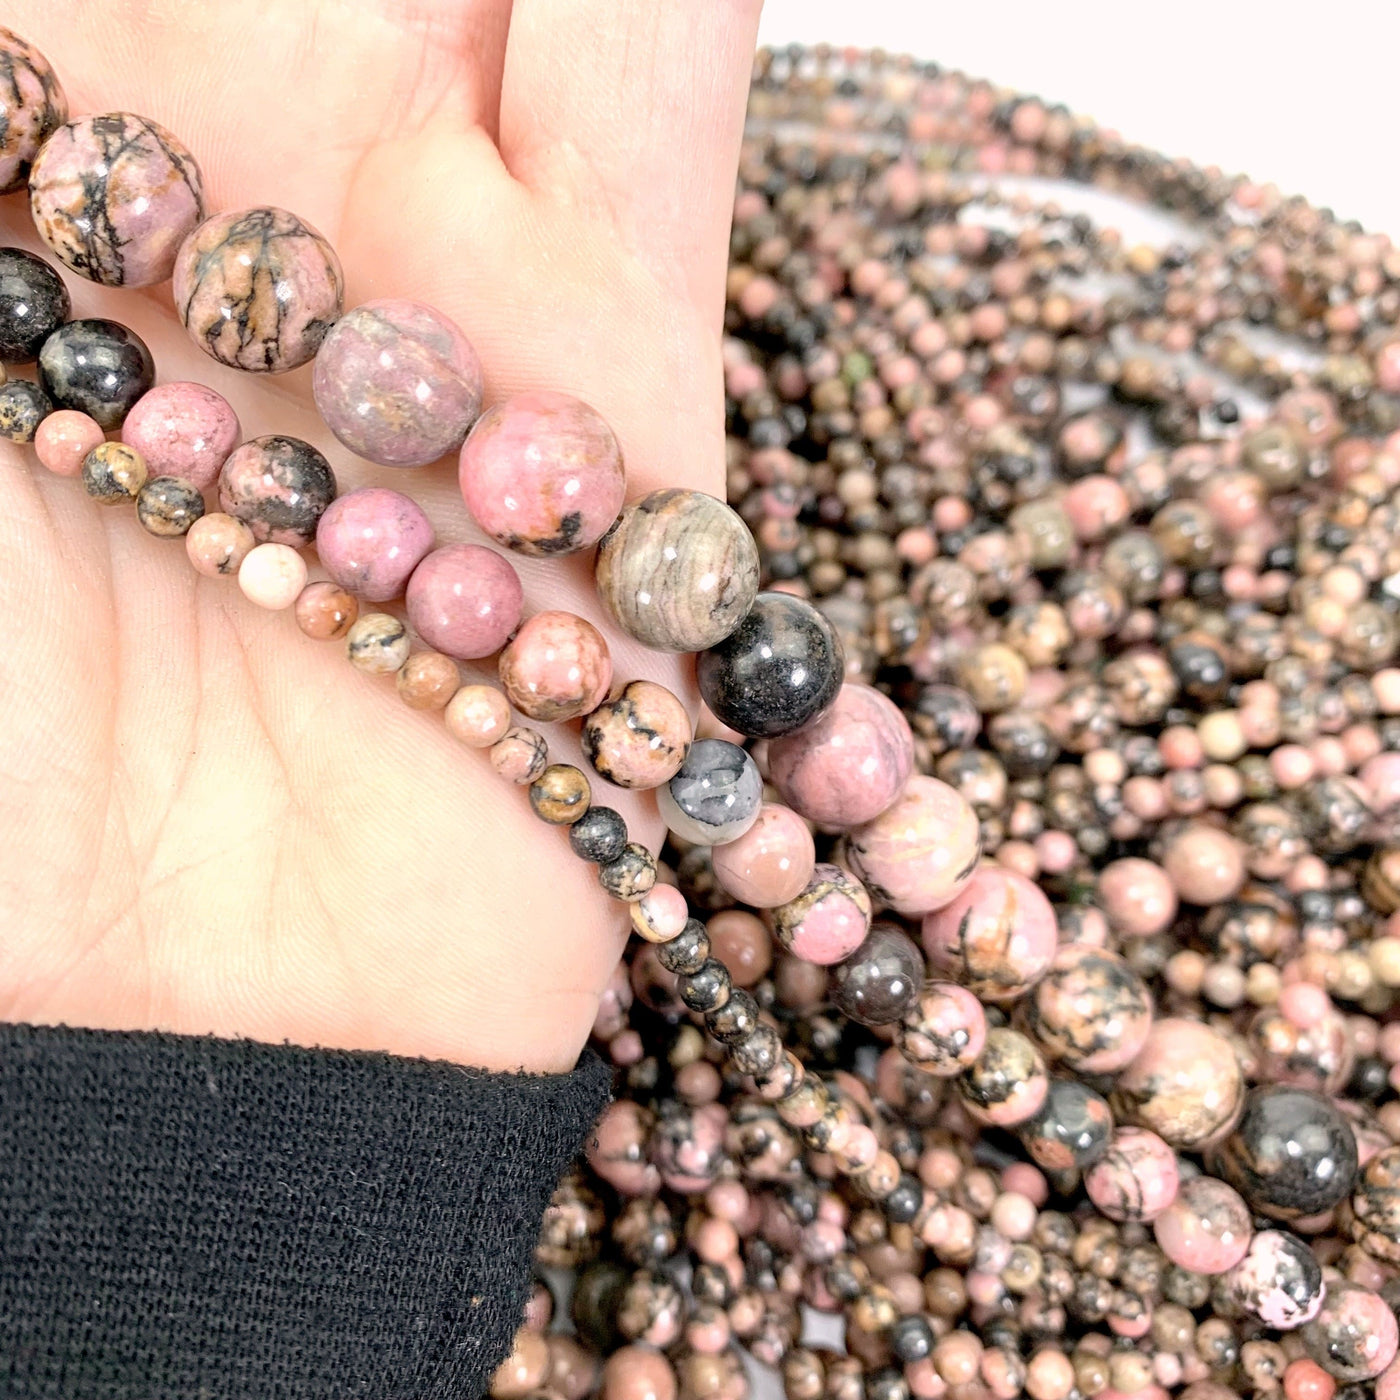 all 3 variations of rhodonite beads in hand with more rhodonite beads in background